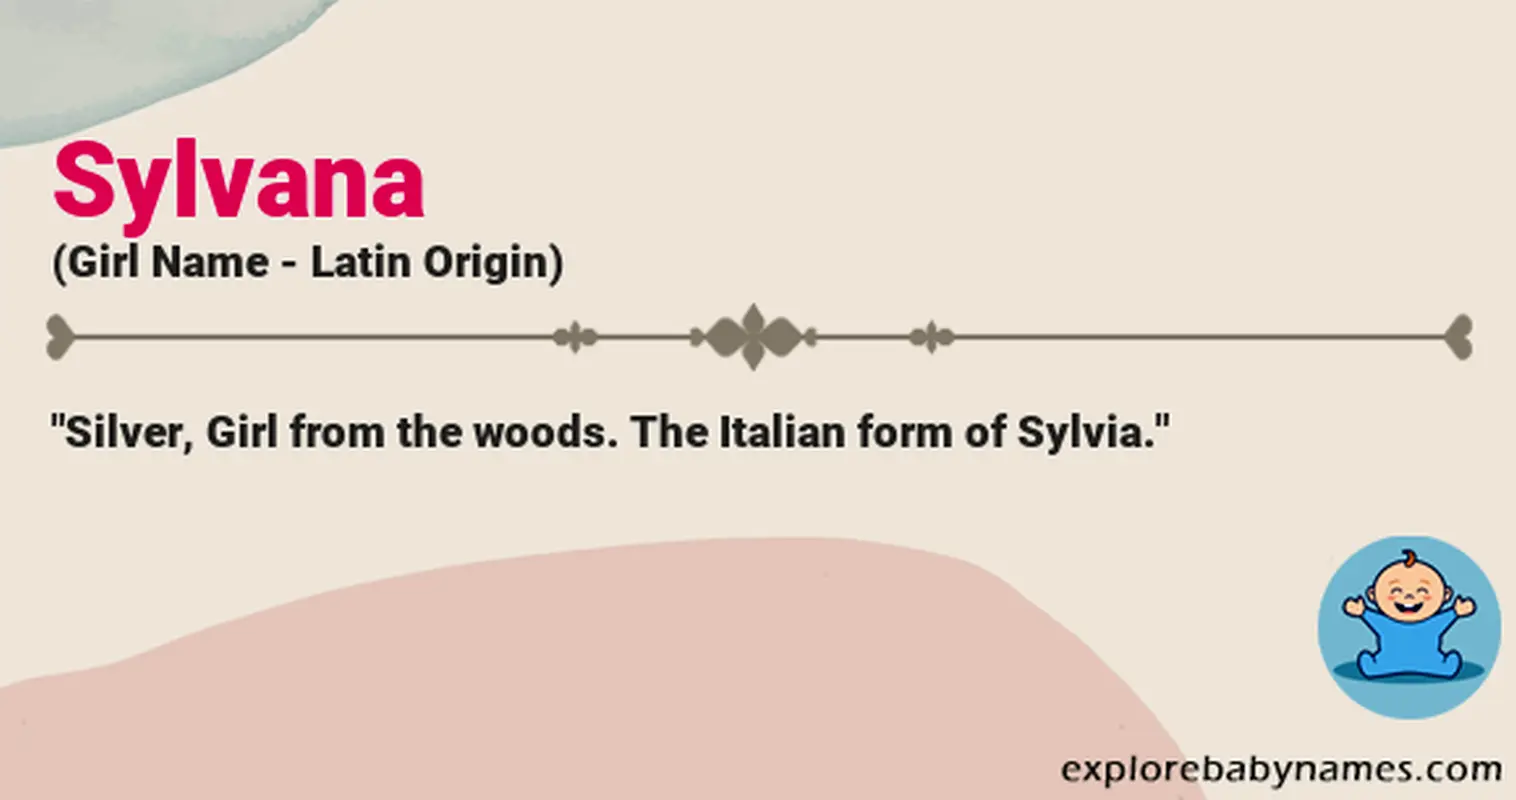 Meaning of Sylvana